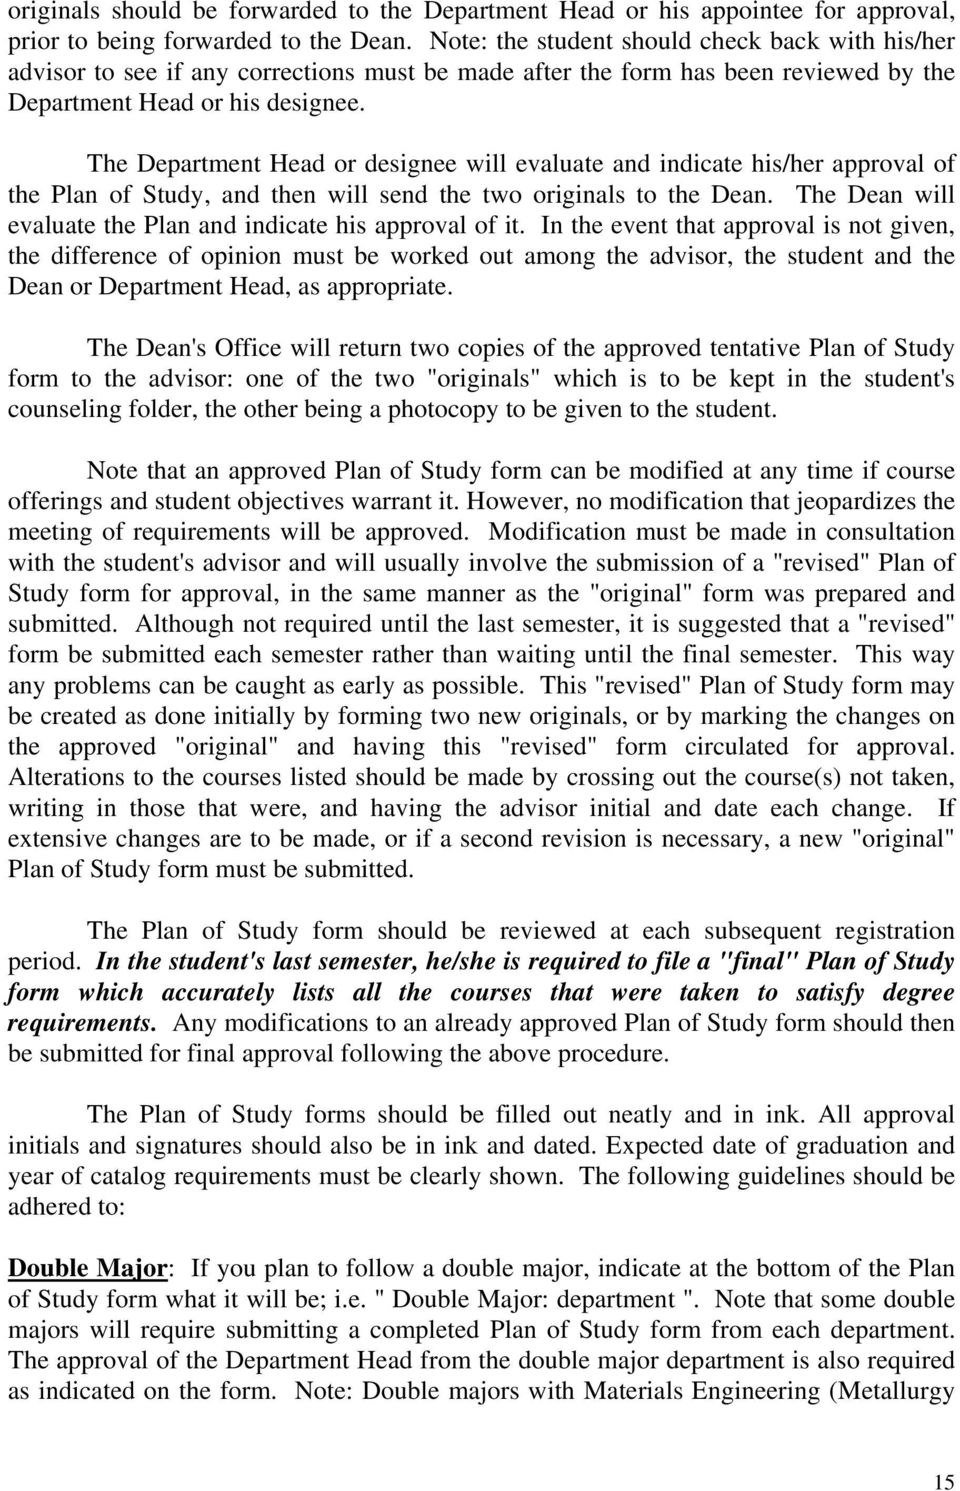 The Department Head or designee will evaluate and indicate his/her approval of the Plan of Study, and then will send the two originals to the Dean.